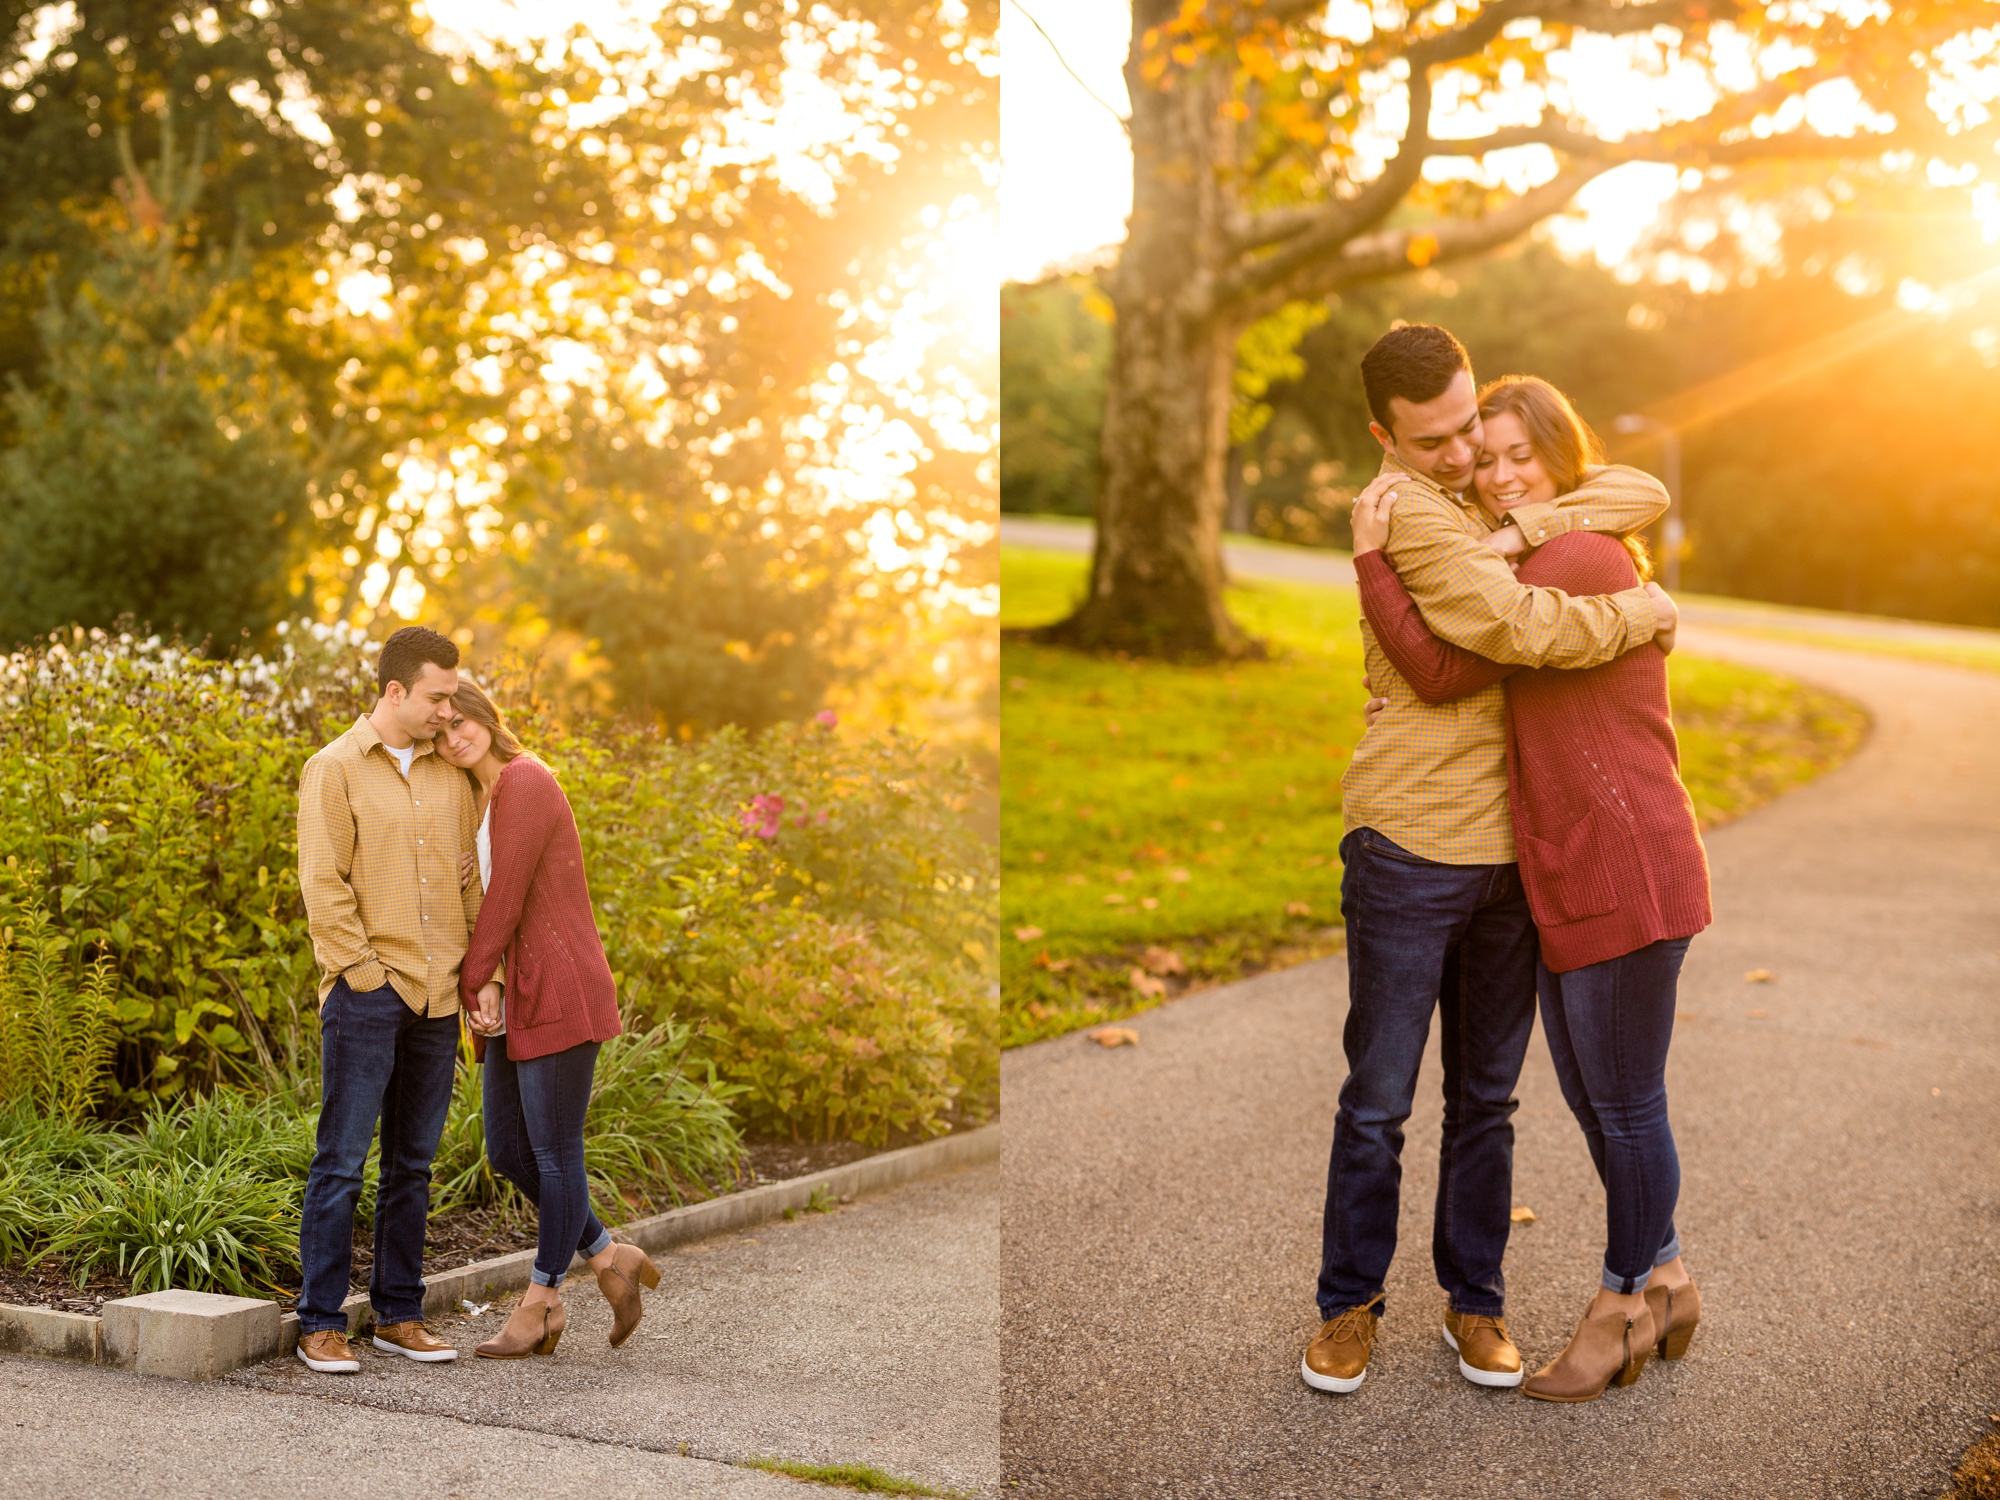 pittsburgh wedding photographer, pittsburgh engagement photos, best spot in pittsburgh for photo shoot, highland park engagement pictures, downtown pittsburgh engagement photos